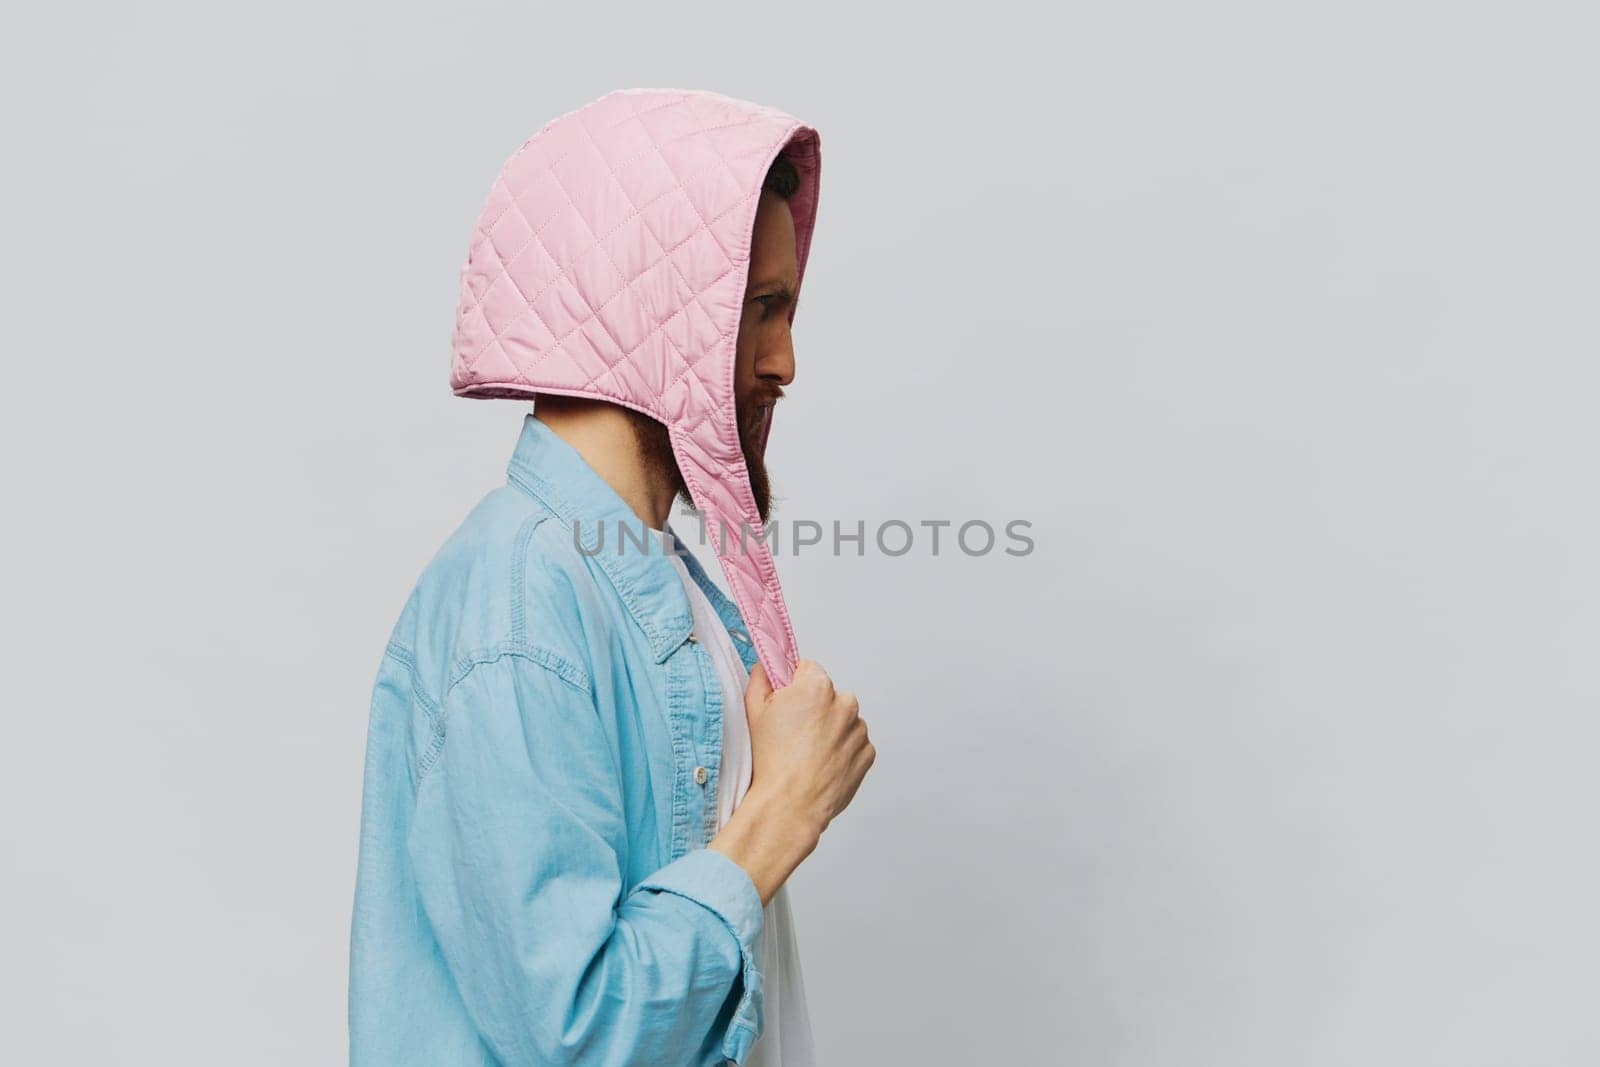 Funny man in a pink hat portrait on a light gray background. Smile and positive emotions. High quality photo